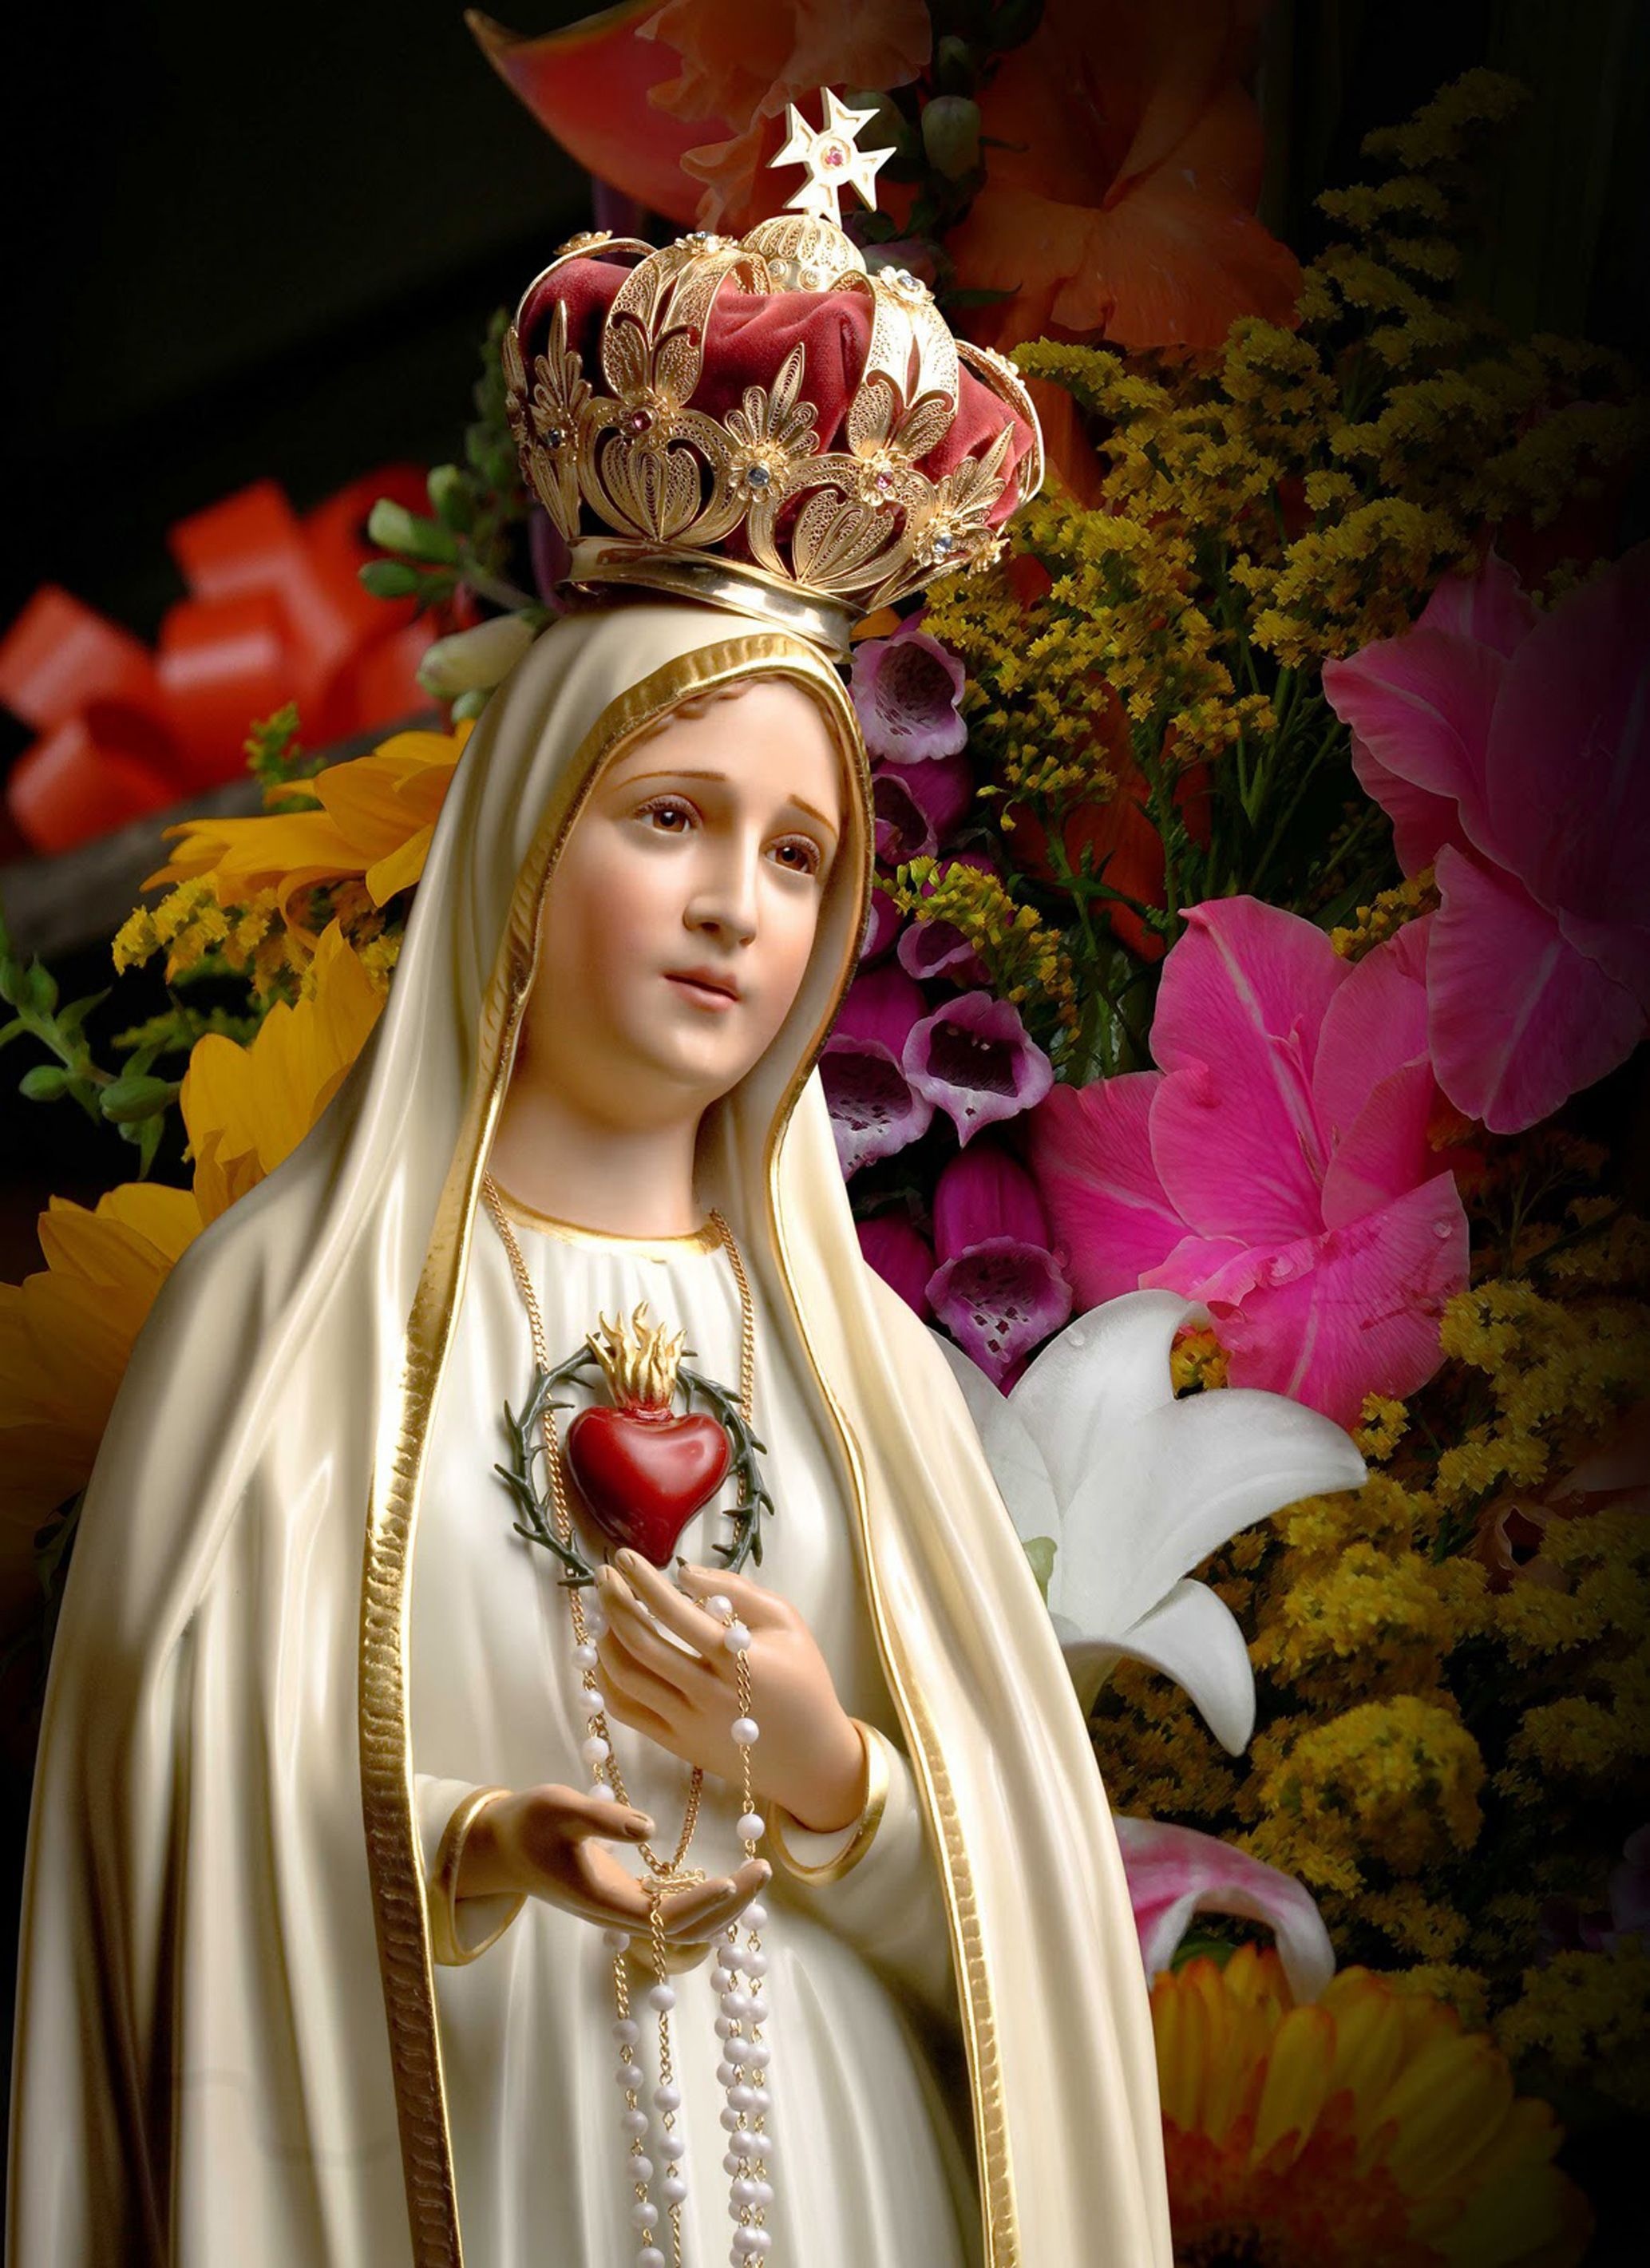 Mother Mary Photos - With Colorful Flowers